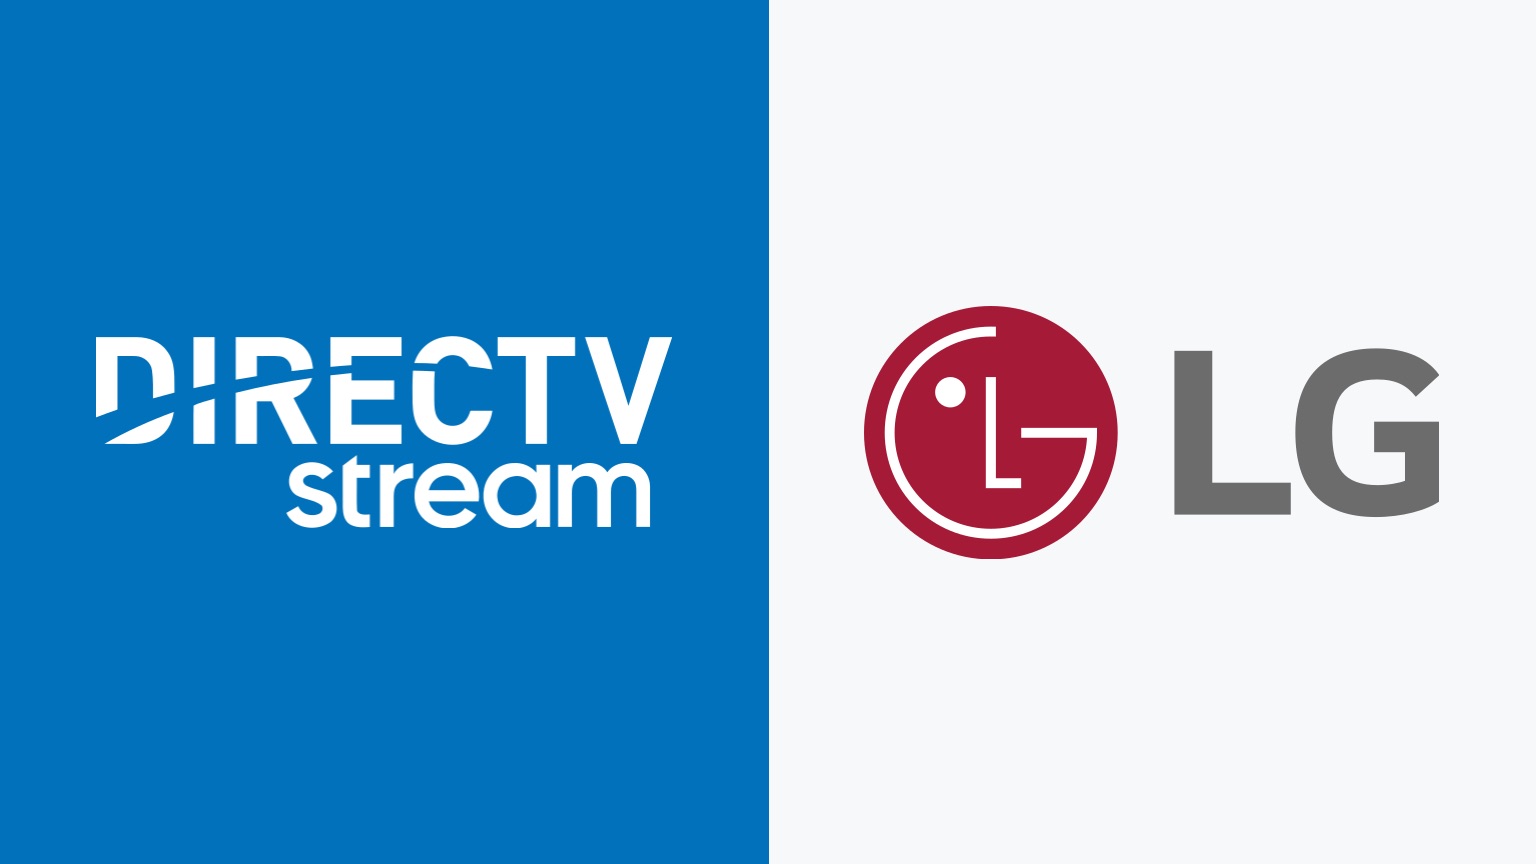 How To Download DIRECTV Stream On LG Smart TV